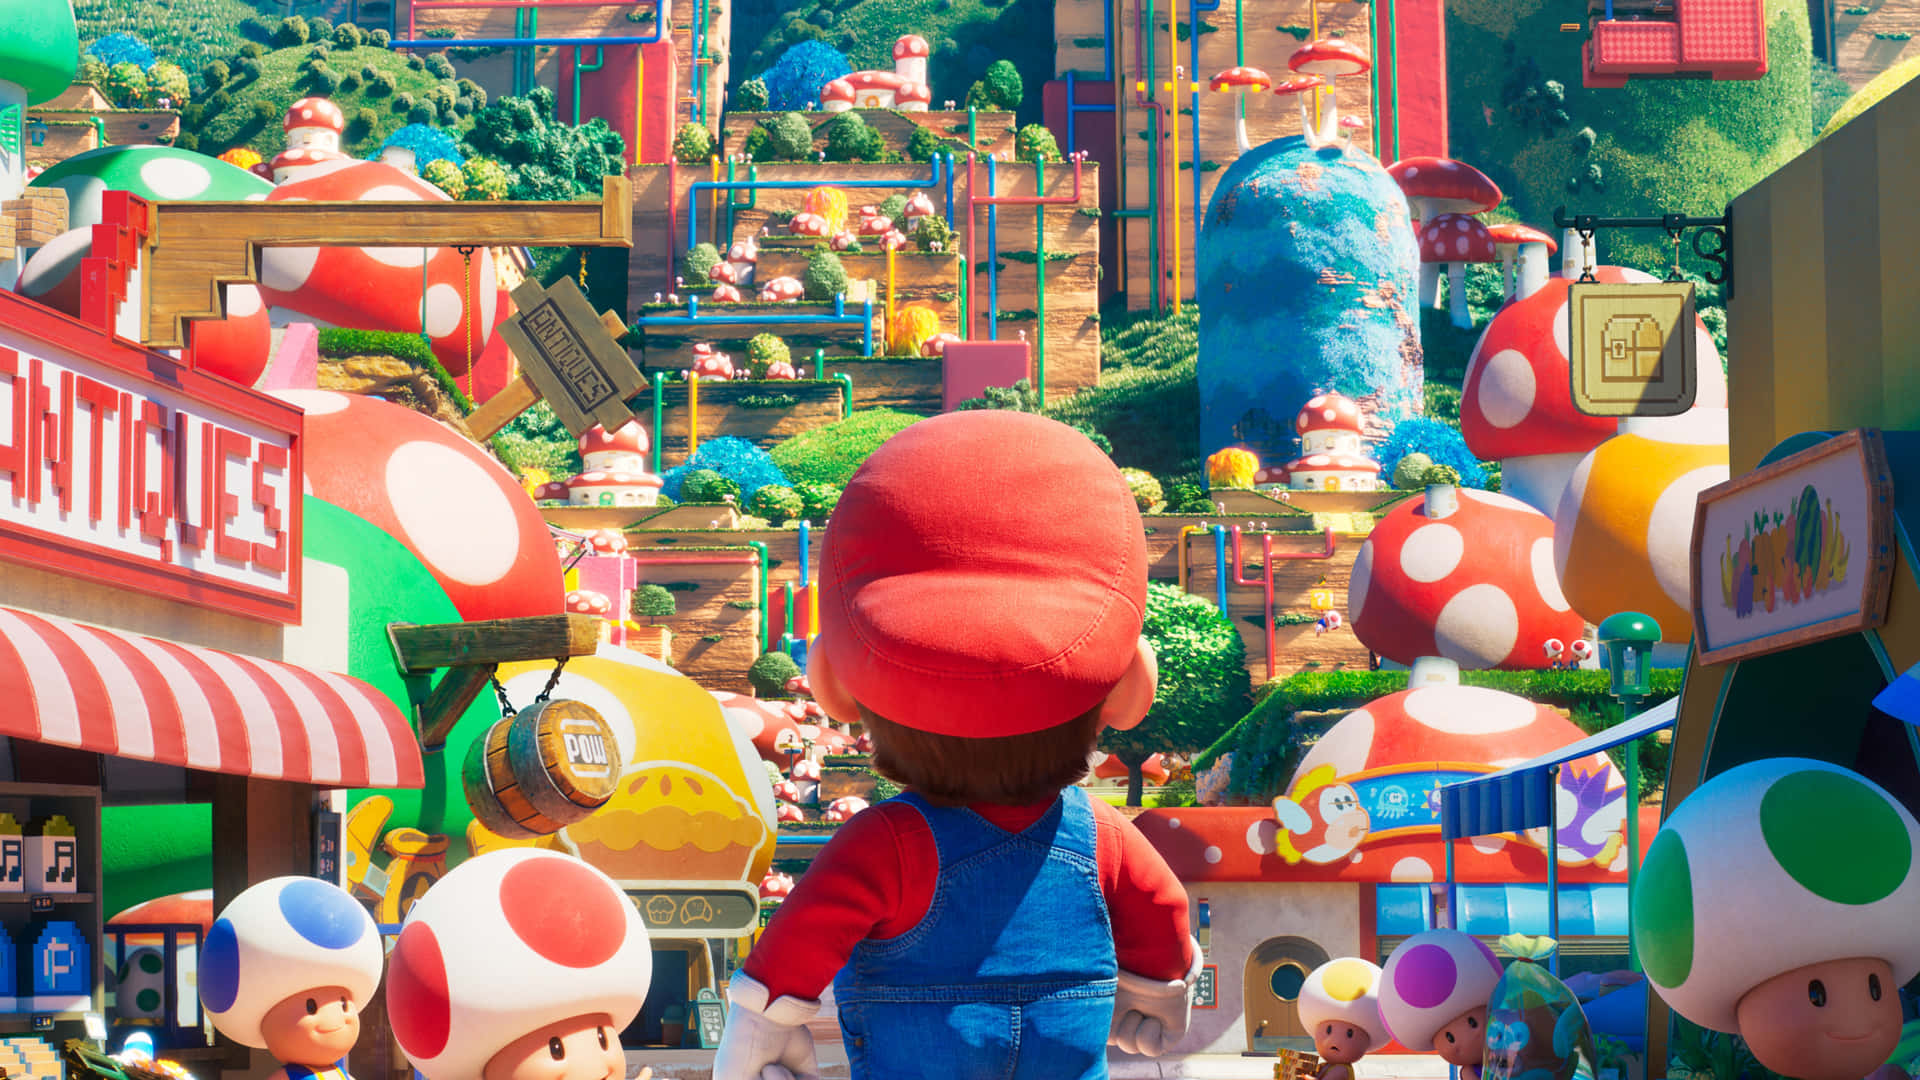 Cool Mario shows off his agility as he collects coins in the Mushroom Kingdom Wallpaper